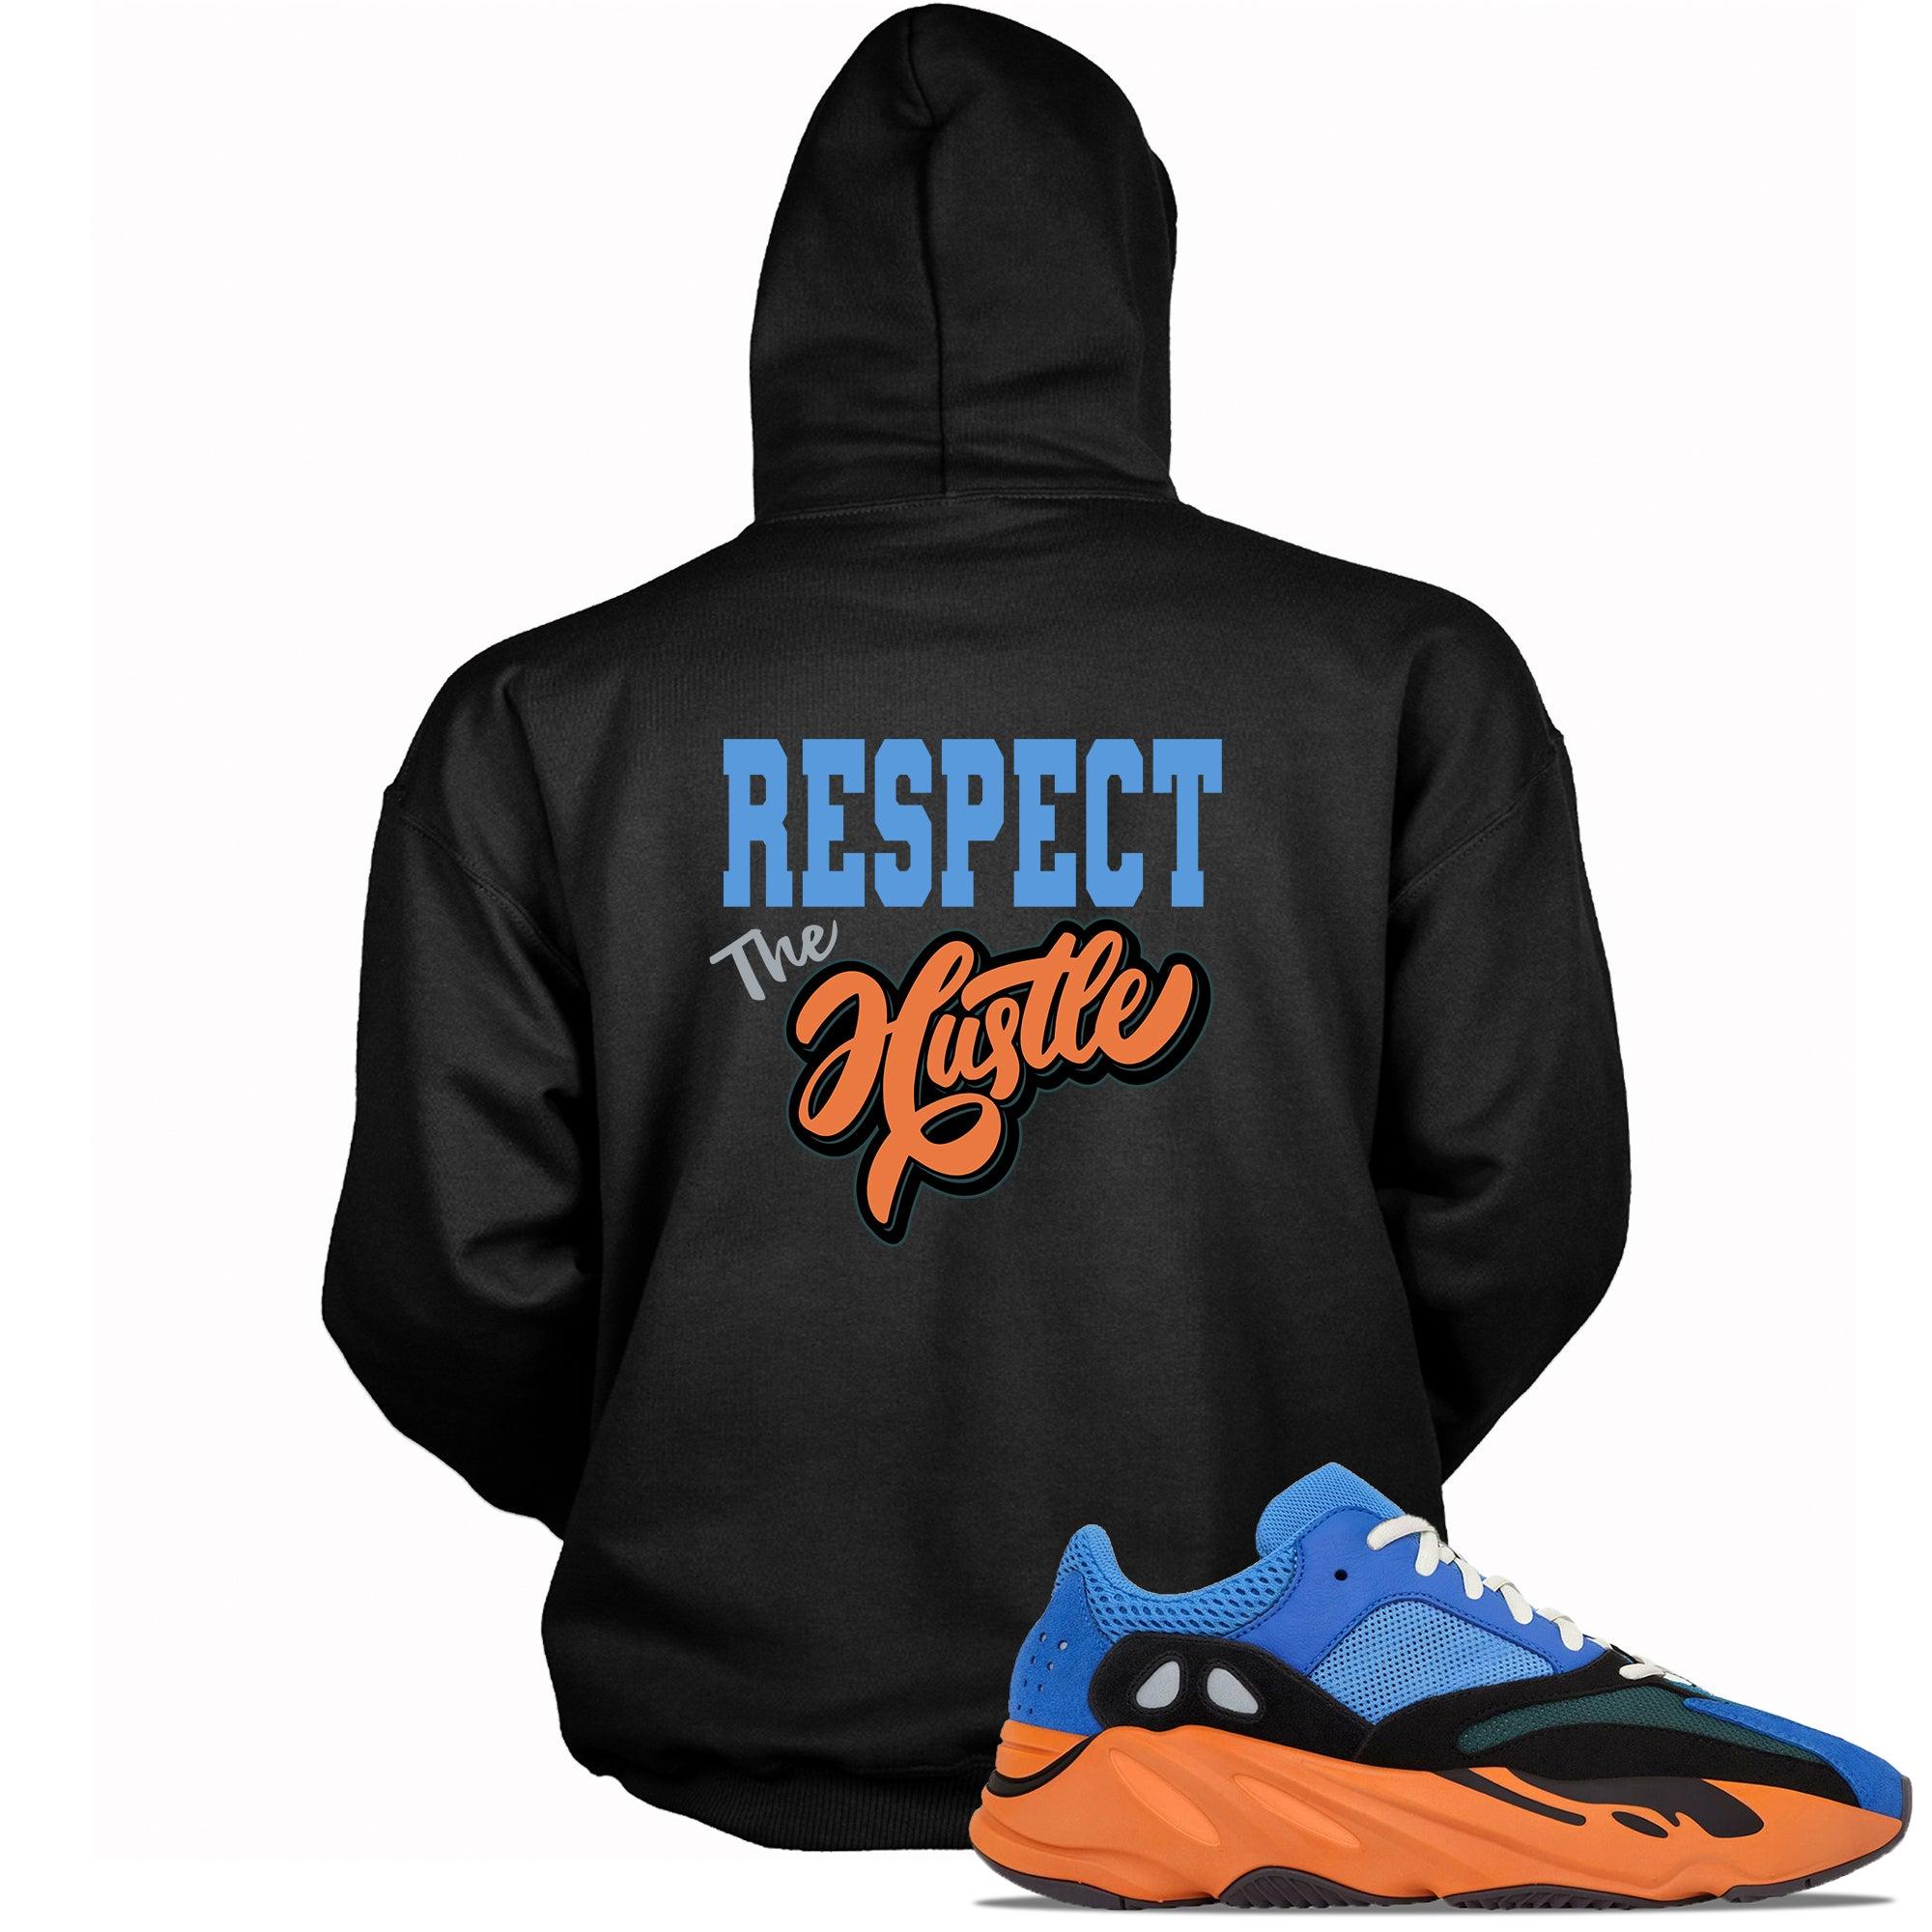 Black Respect The Hustle Hoodie Yeezy Boost 700s Bright Blue photo